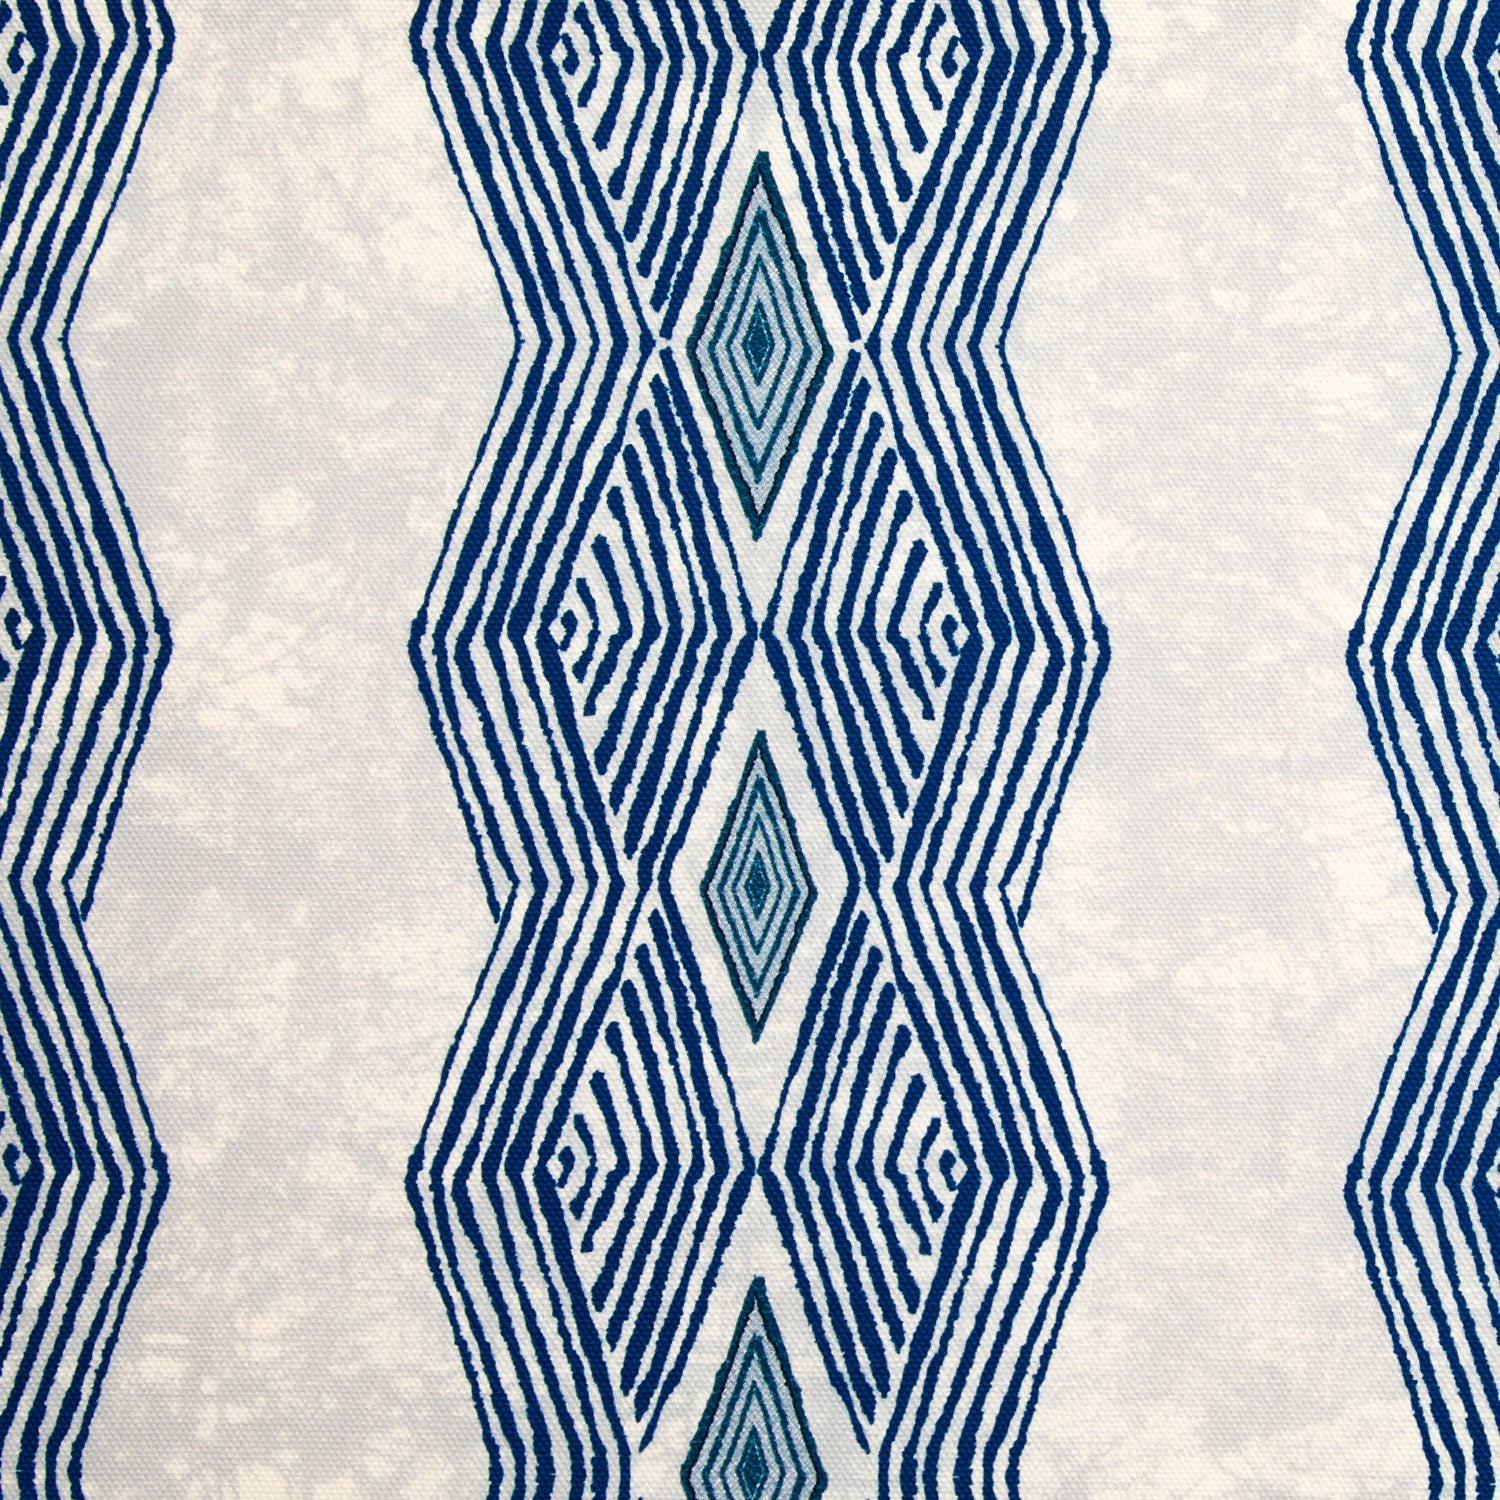 Detail of fabric in an intricate diamond stripe print in blue and navy on a cream field.